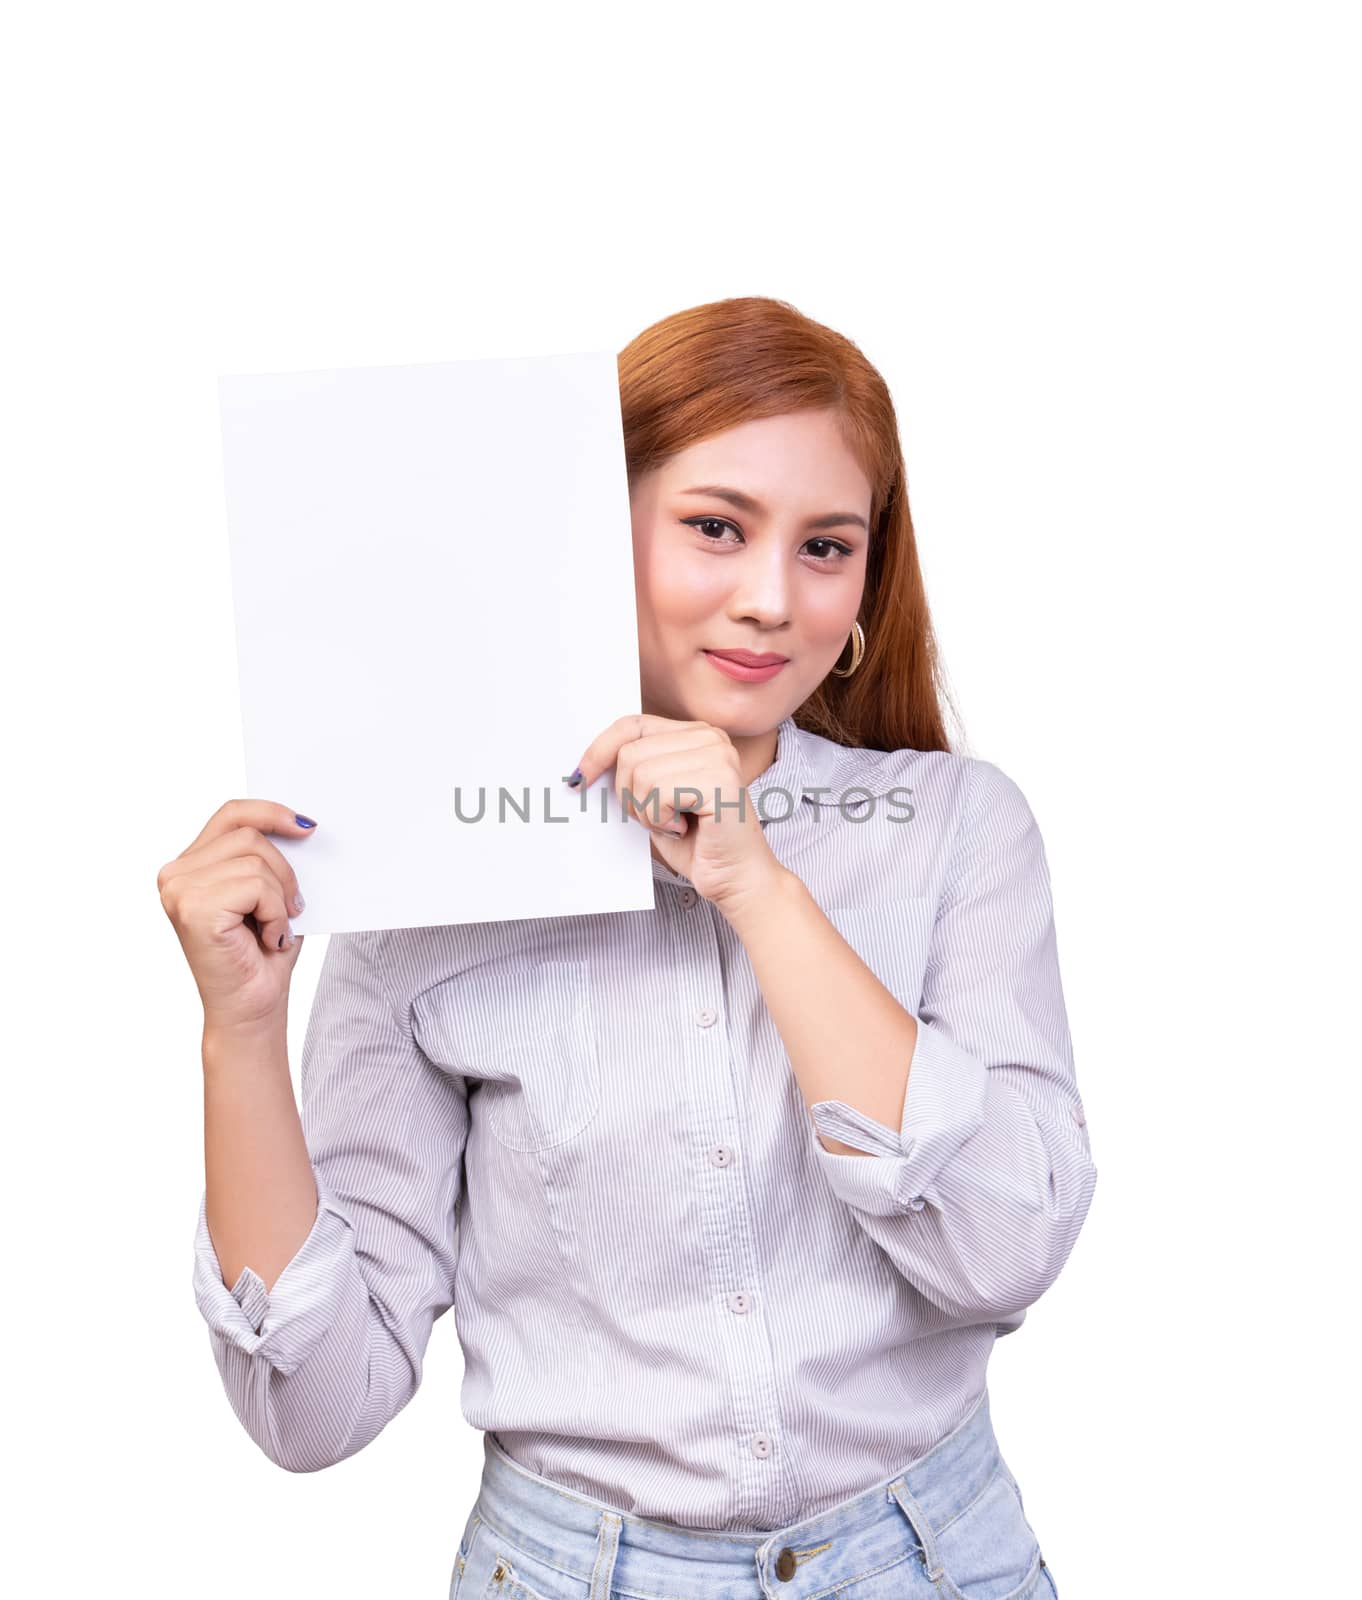 smiling Asian woman holding blank white banner, business sign board  paper with clipping path. studio portrait of beautiful female model with long hair by asiandelight